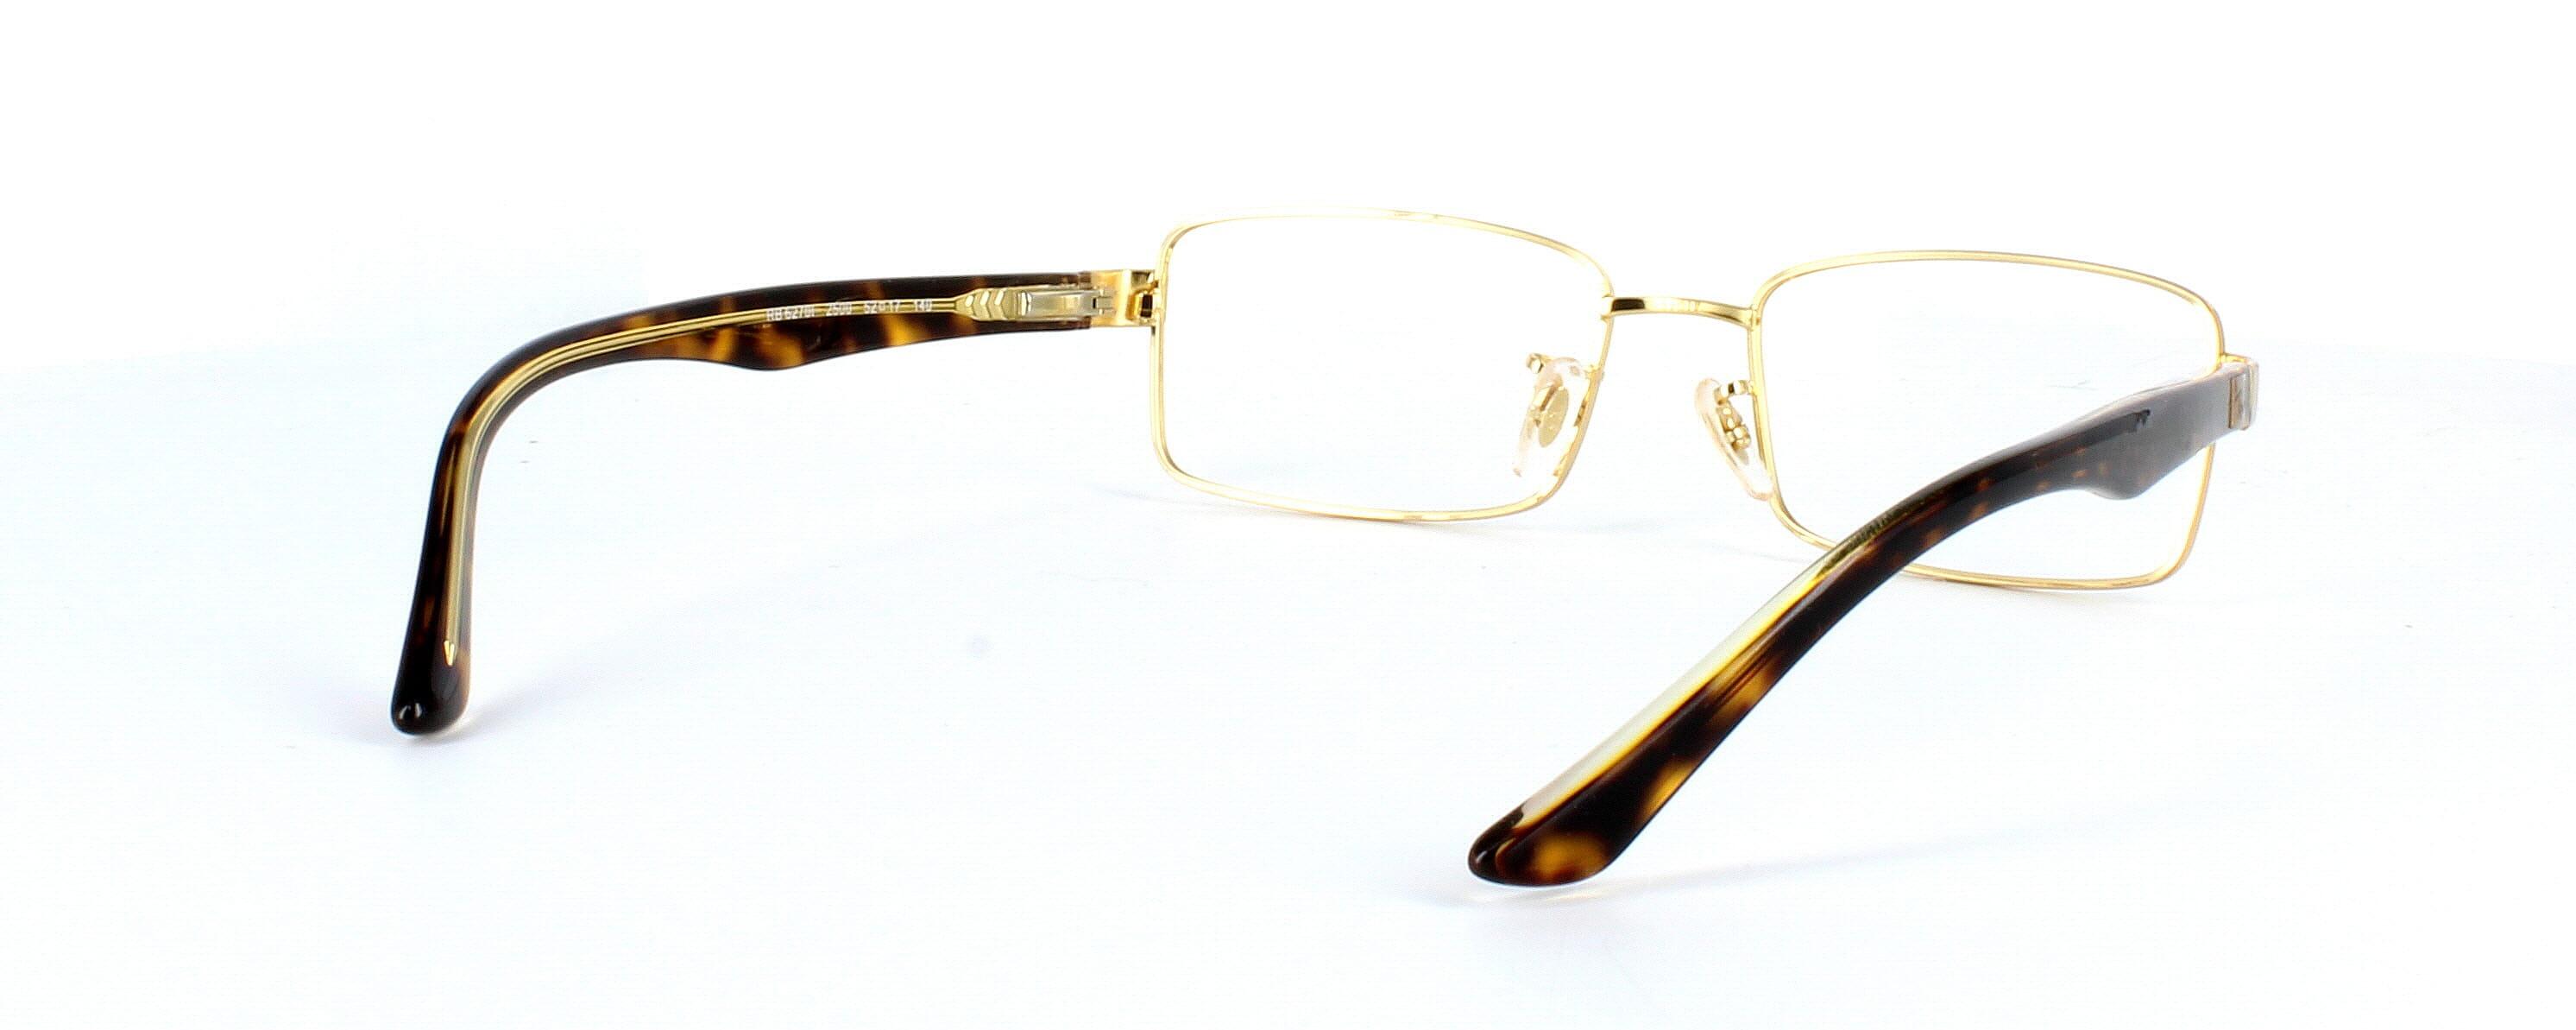 Ray Ban 62701 Gold - Gent's narrow full metal rectangular shaped glasses in gold - image view 5